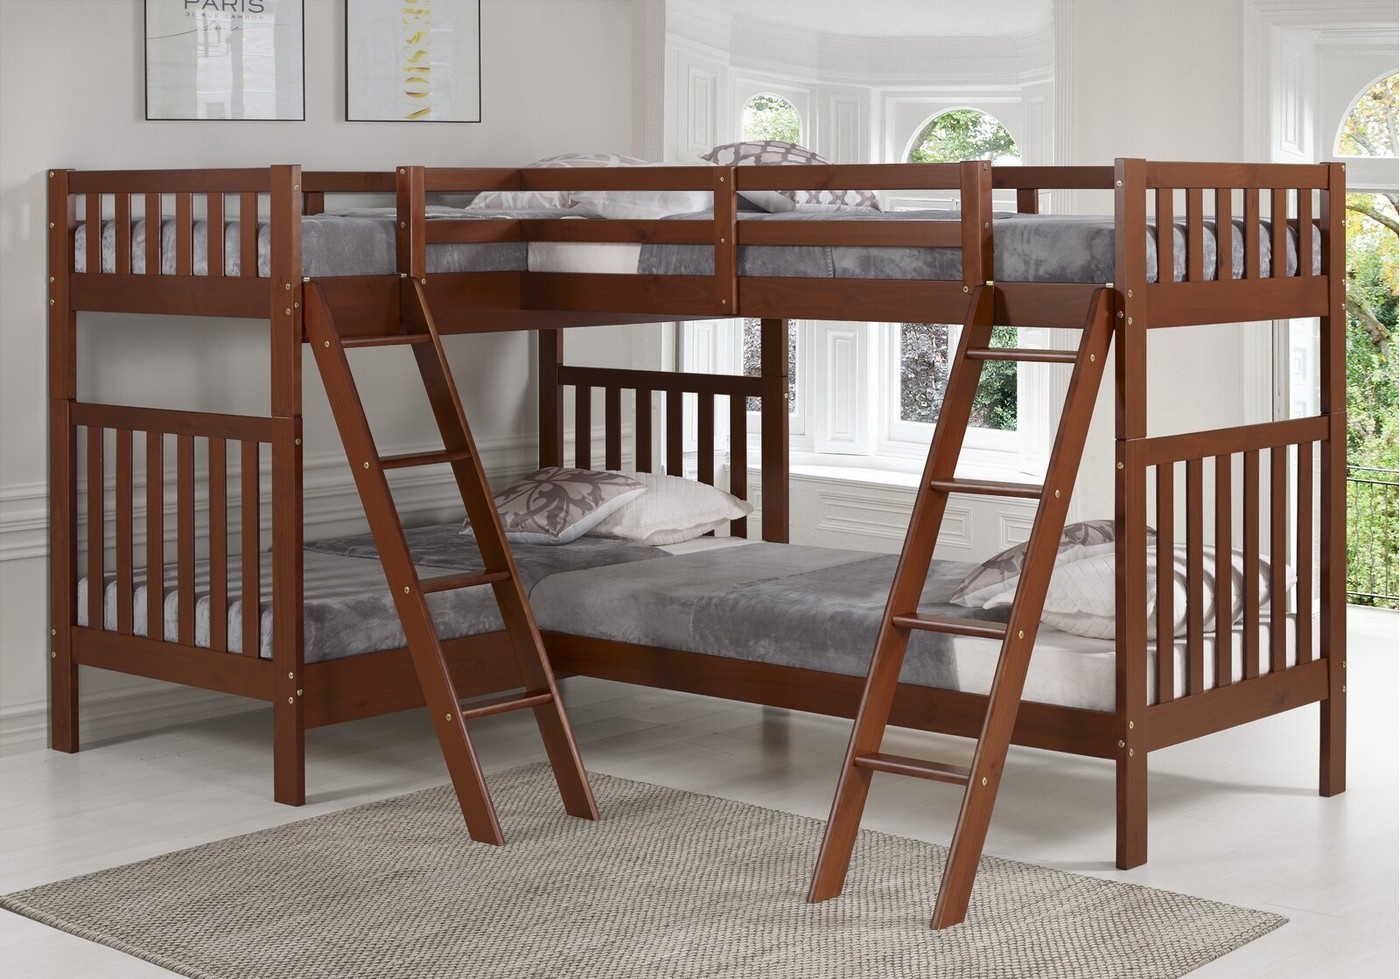 L Shaped Bunk Beds Visualhunt, L Shaped Bunk Beds Twin Over Full